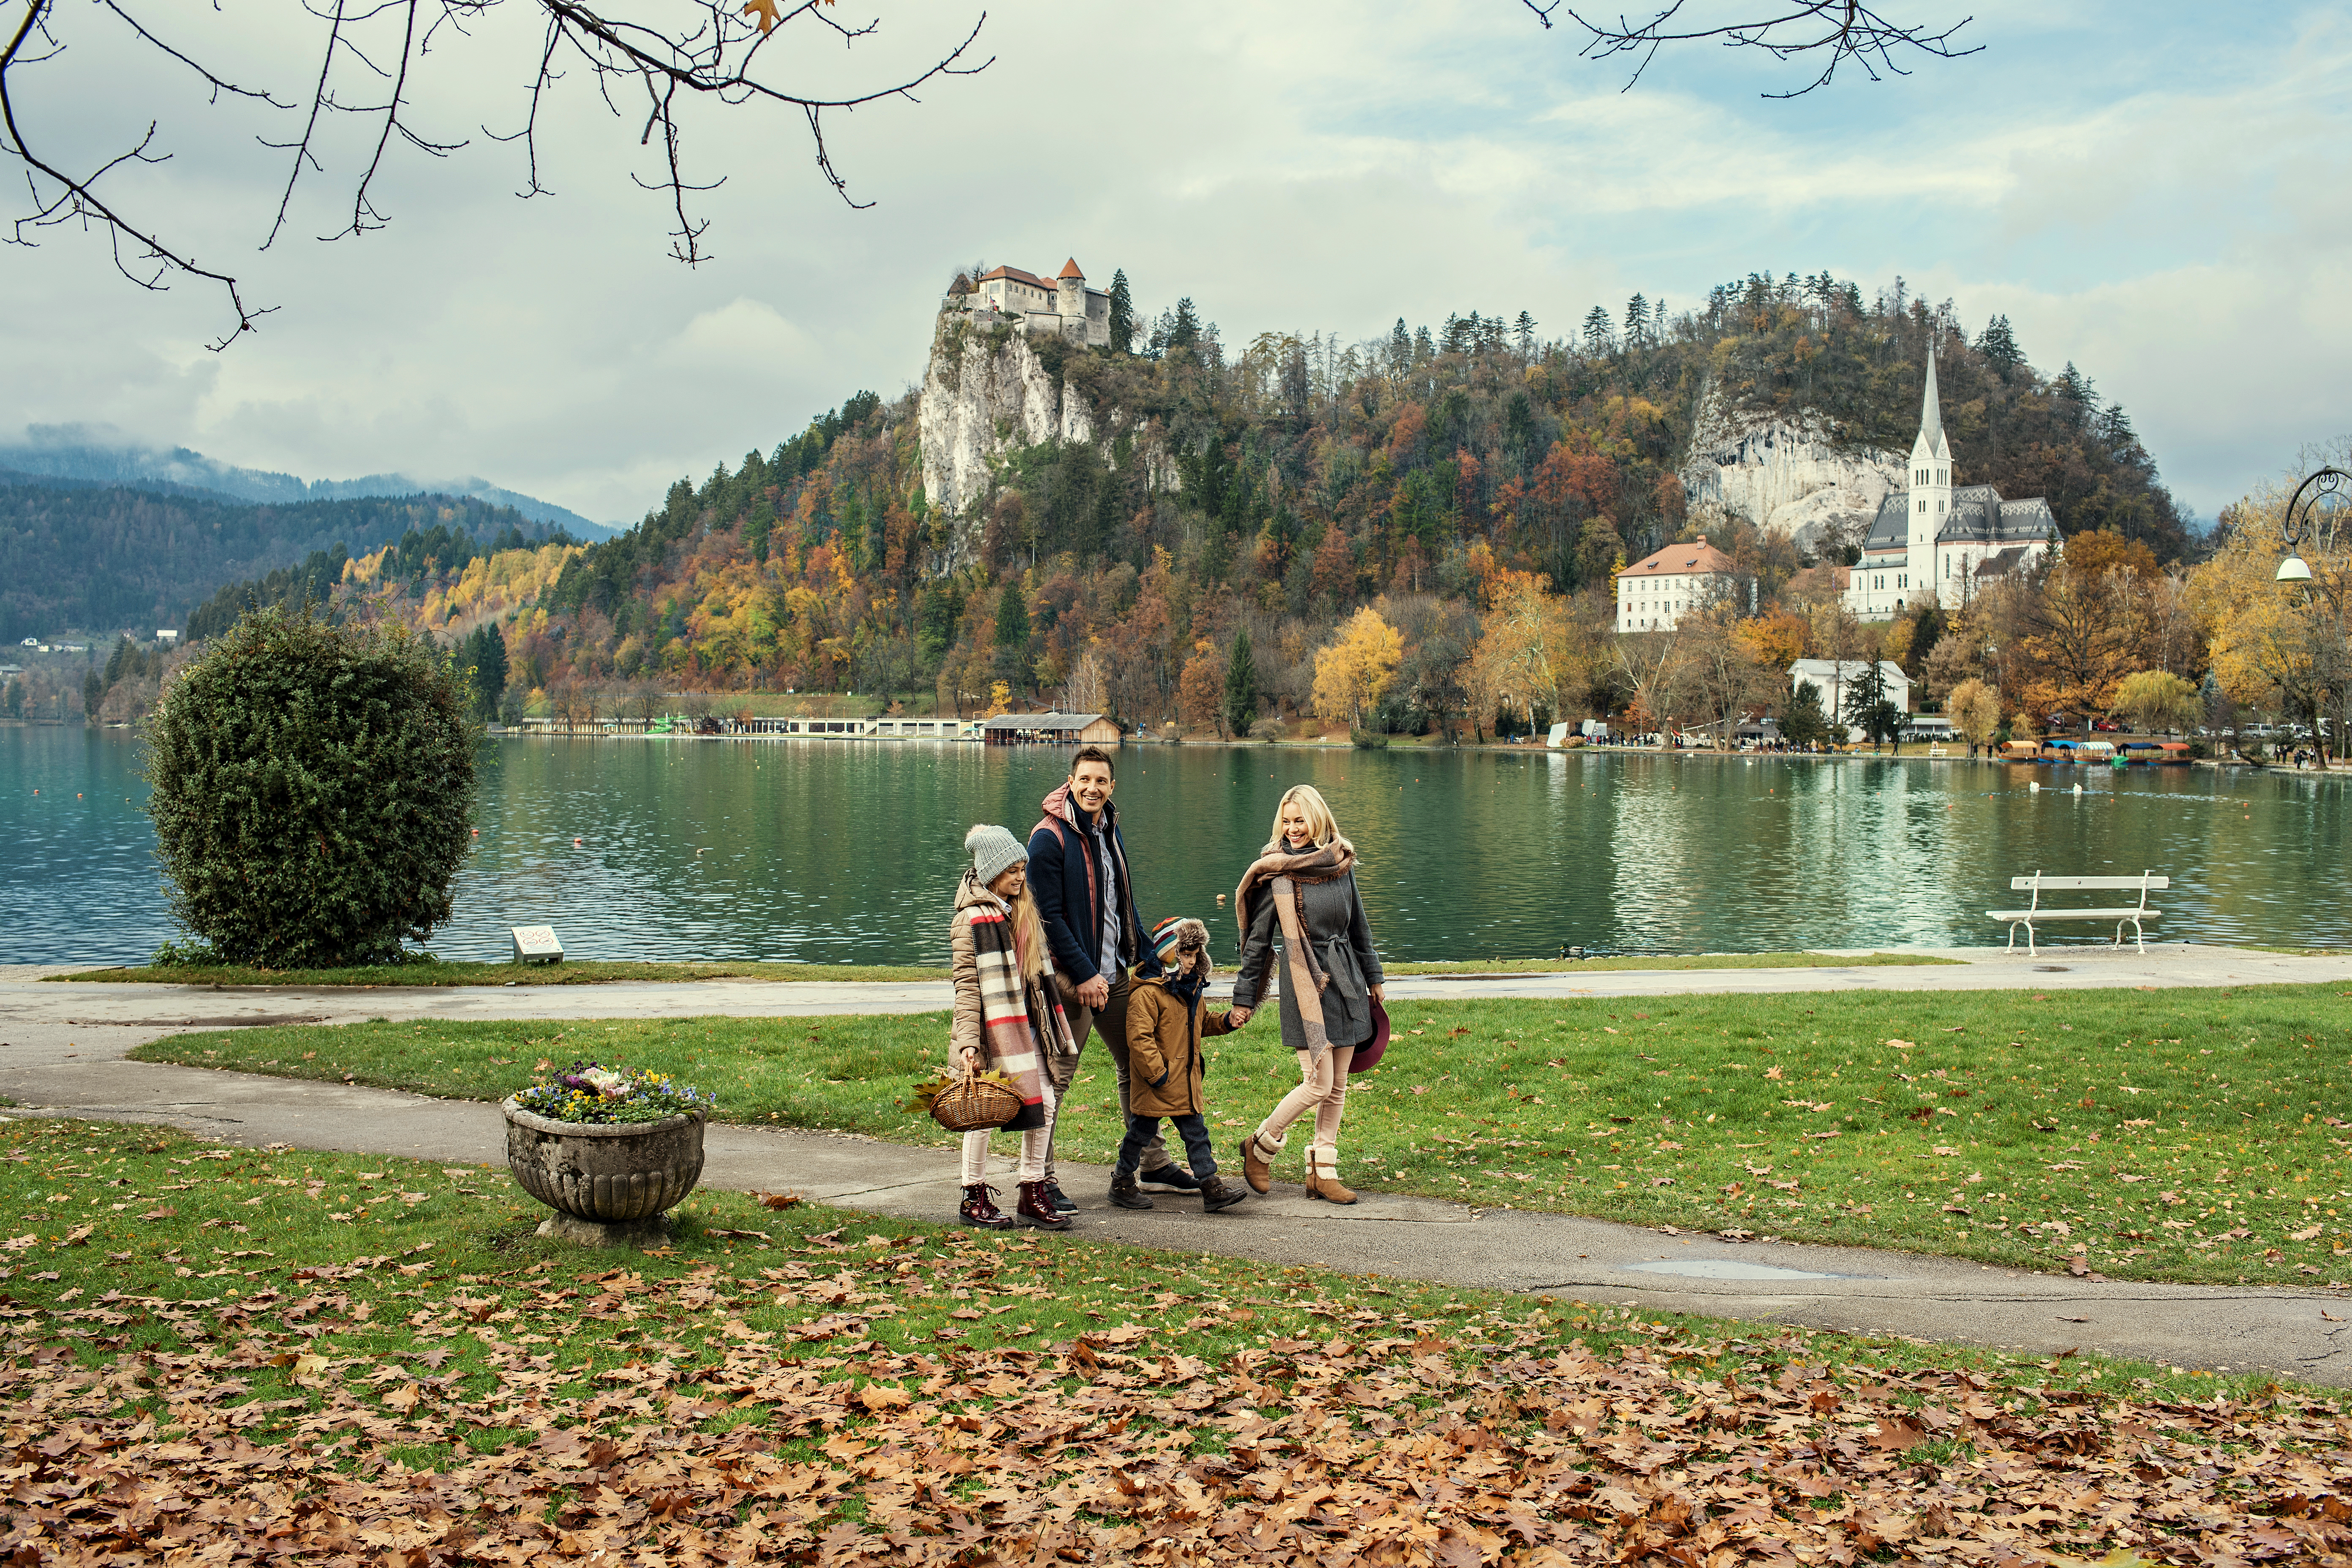 Bled is the best destination for a half-term holiday in Europe (The Guardian)